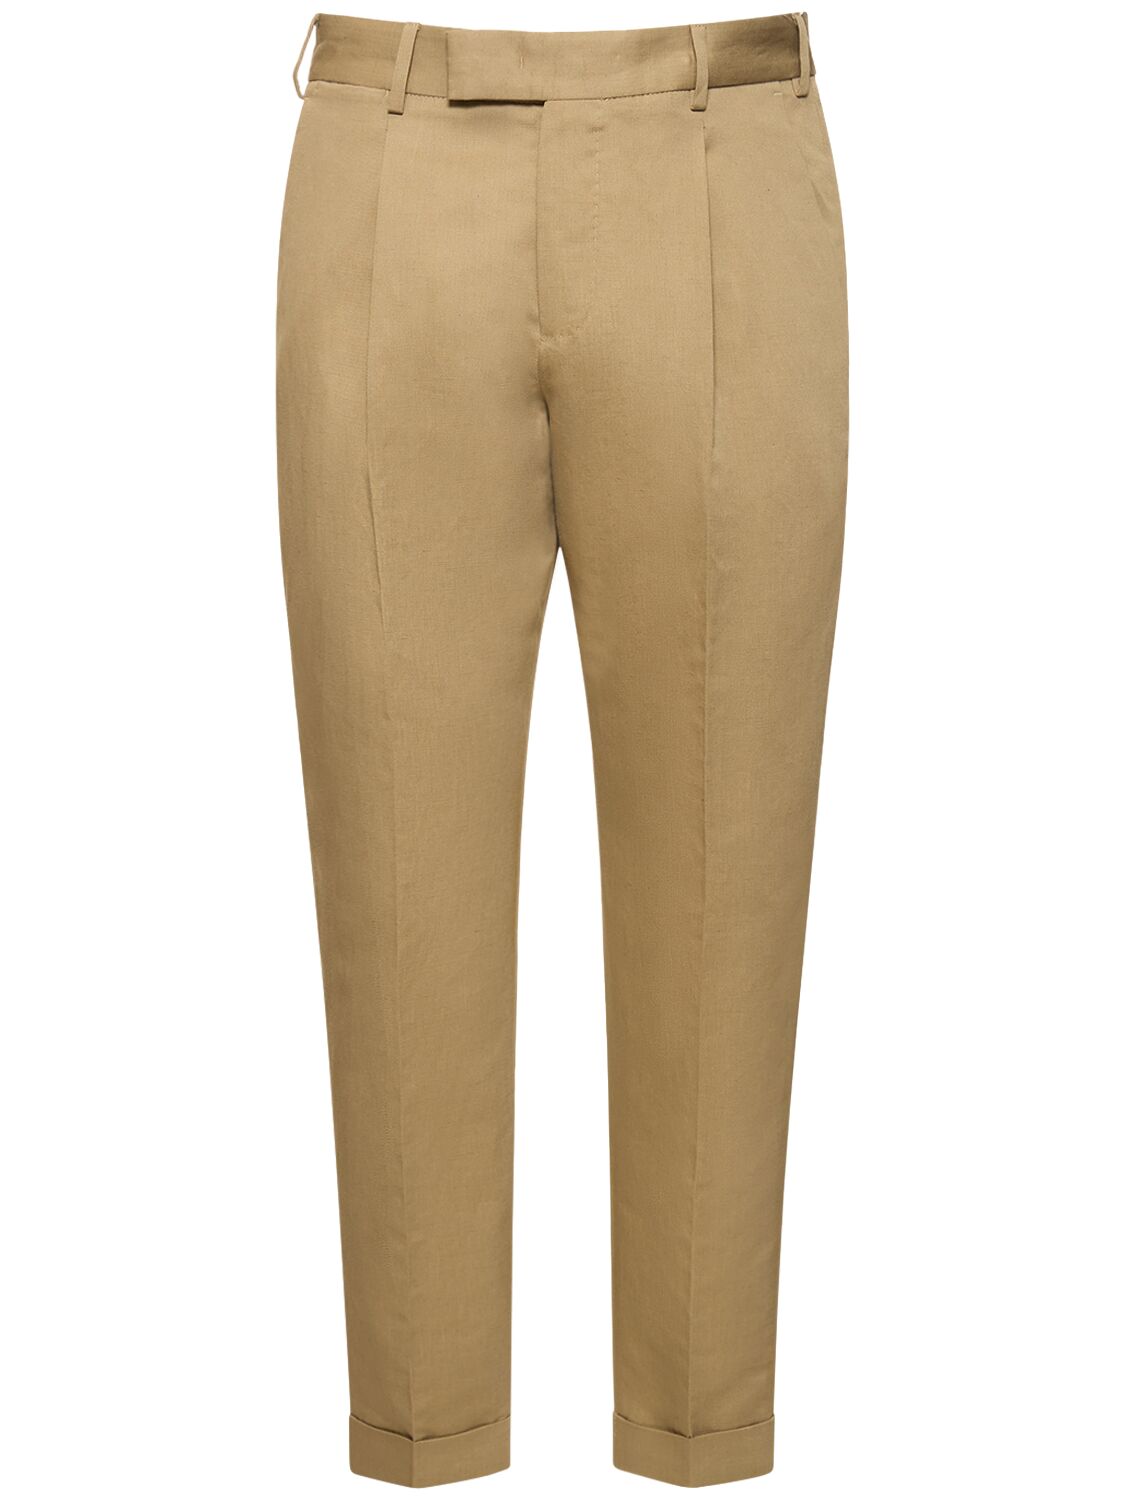 Pt Torino The Rebel Cotton Trousers In Beige